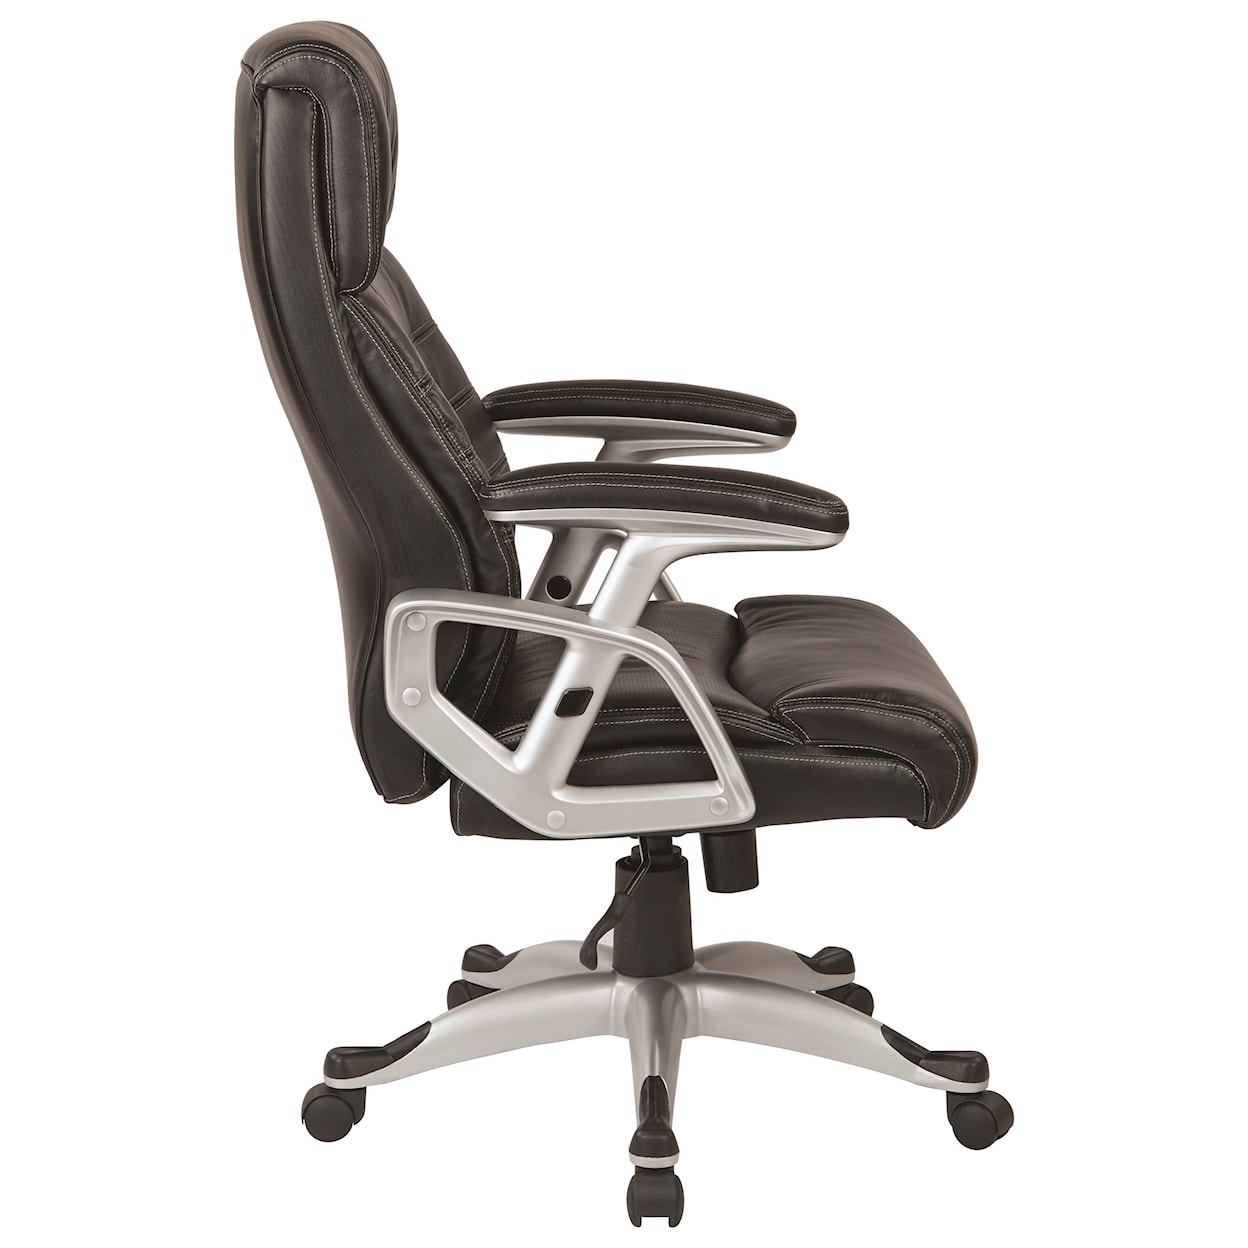 Office Star Office Chairs Executive Chair